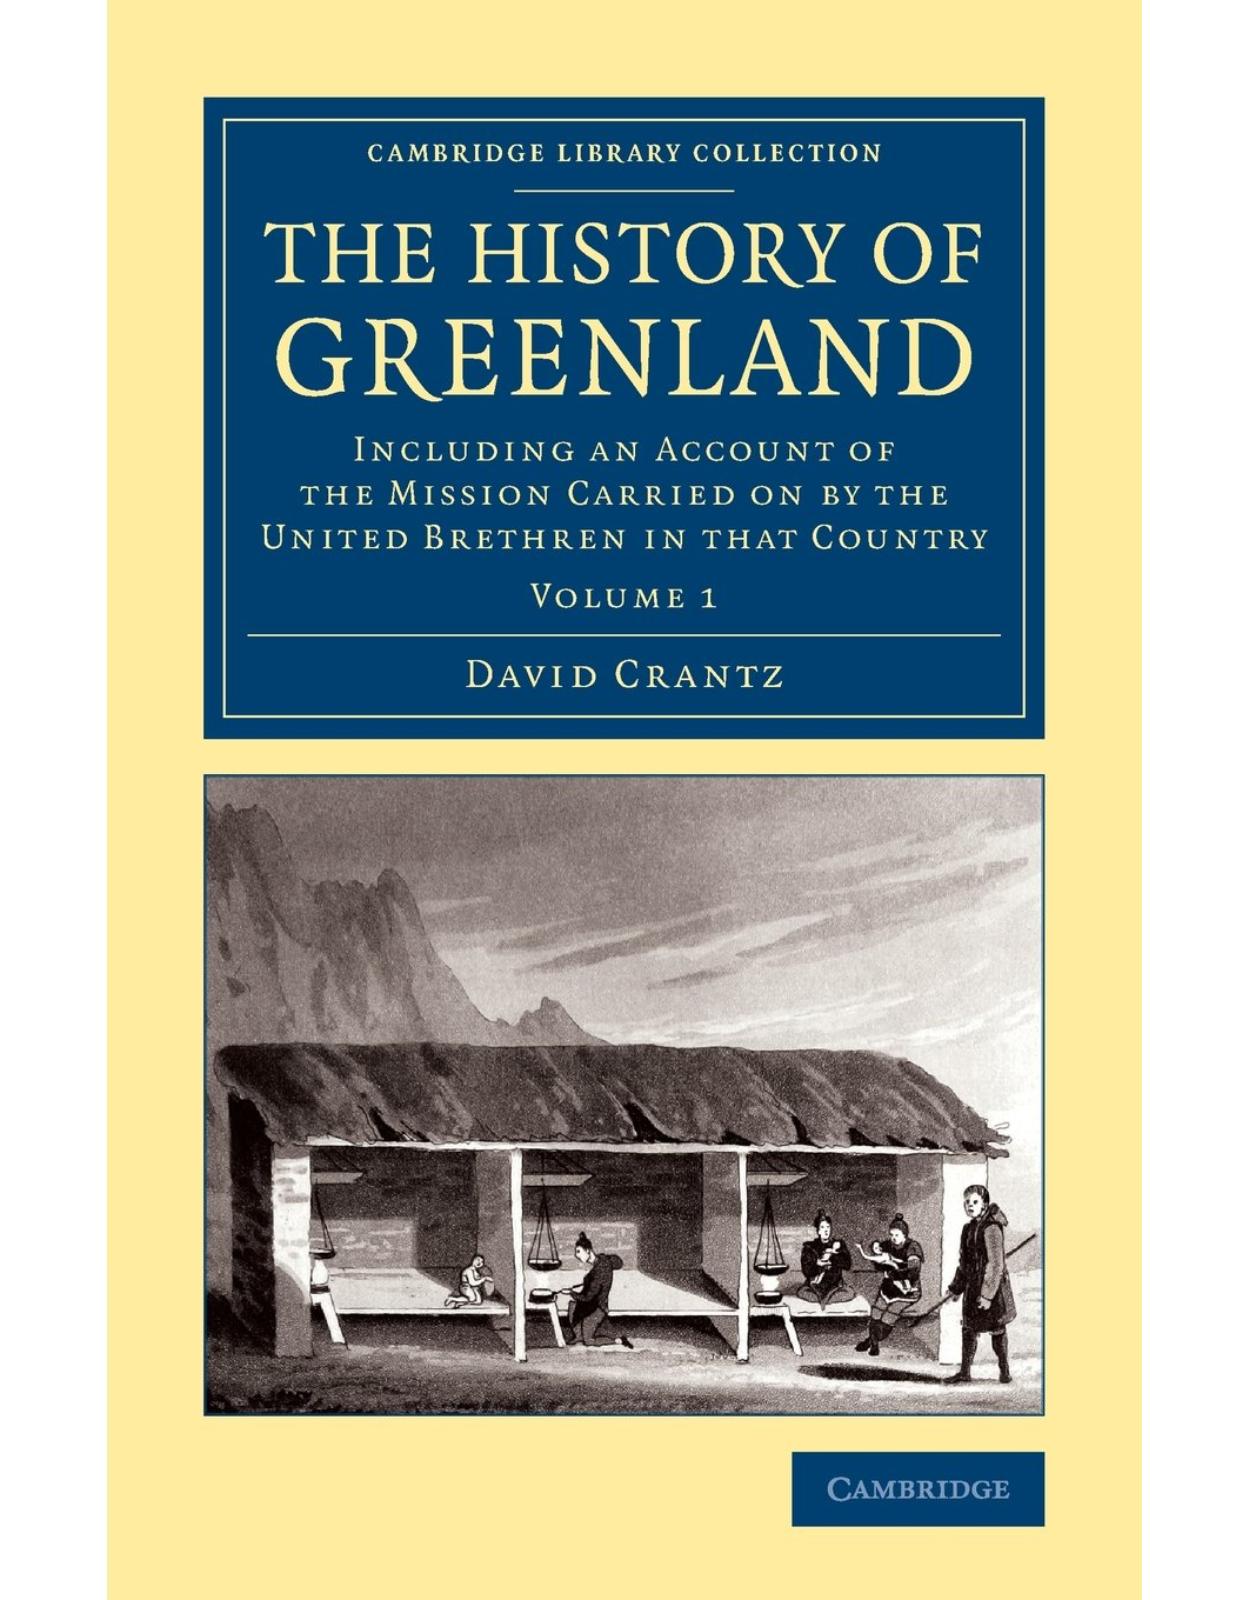 The History of Greenland: Including an Account of the Mission Carried on by the United Brethren in that Country